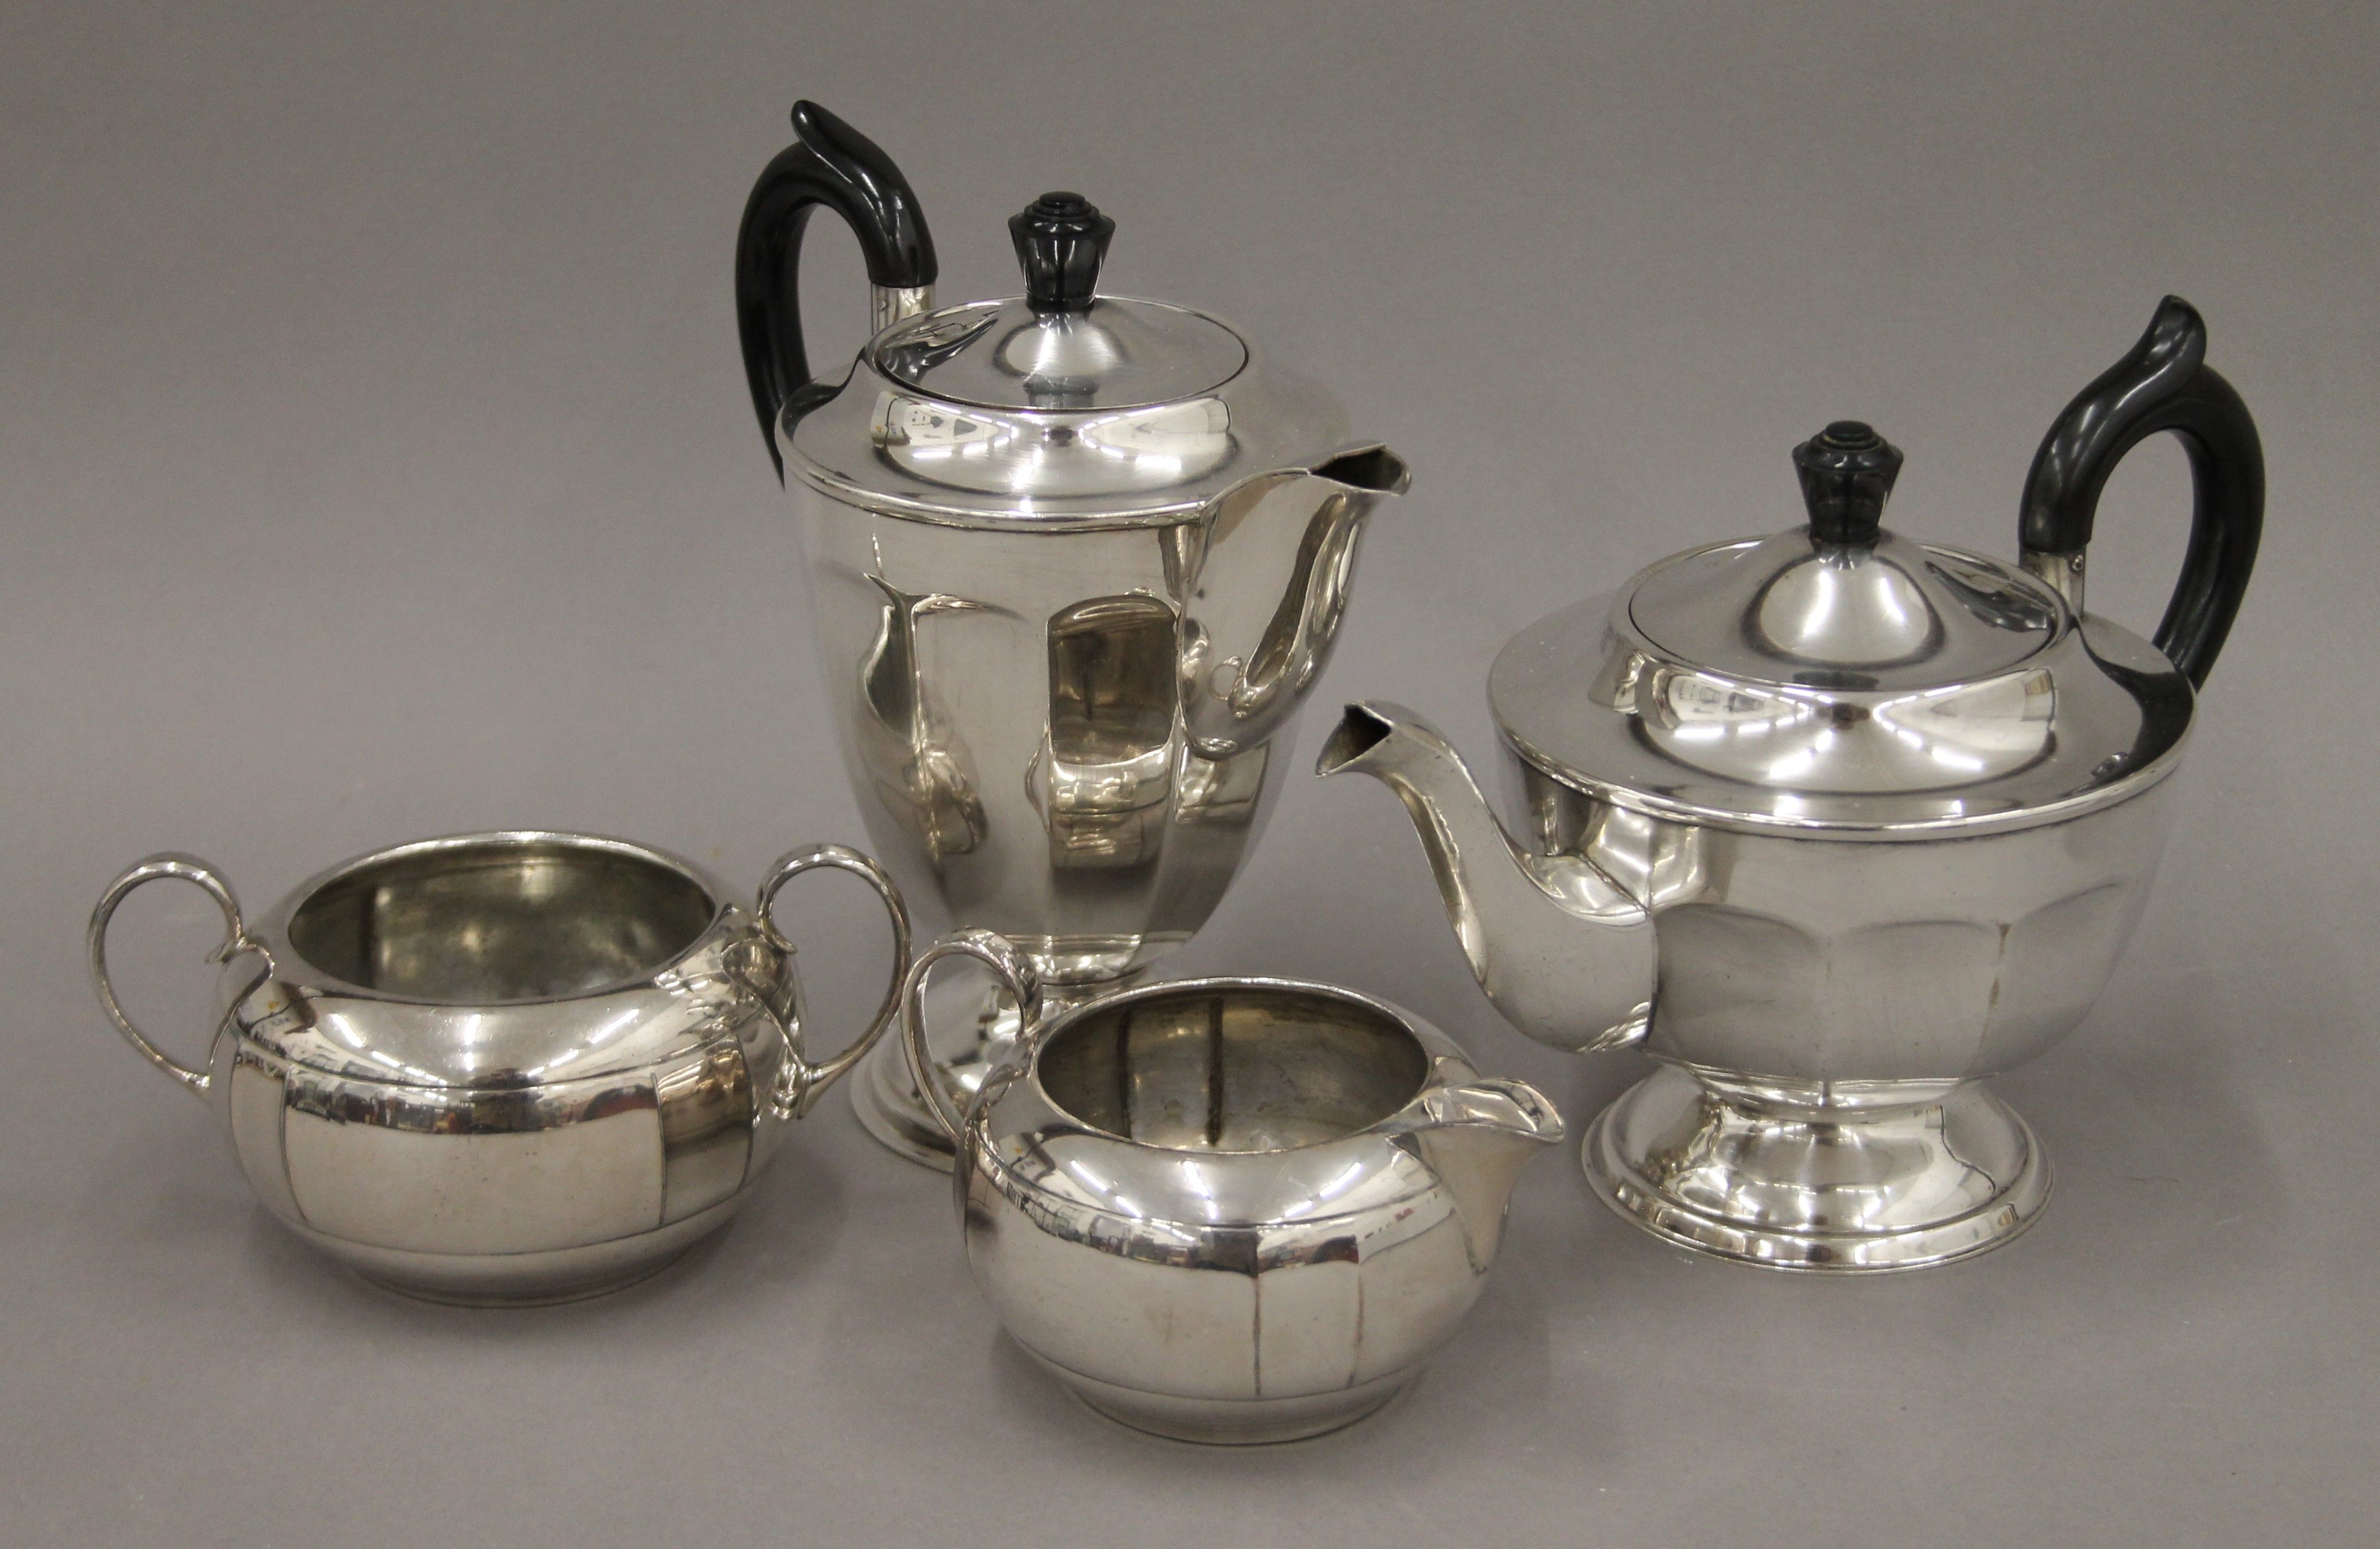 A Viners silver-plated teapot, coffee pot, sugar bowl and cream jug. The coffee pot 18 cm high.